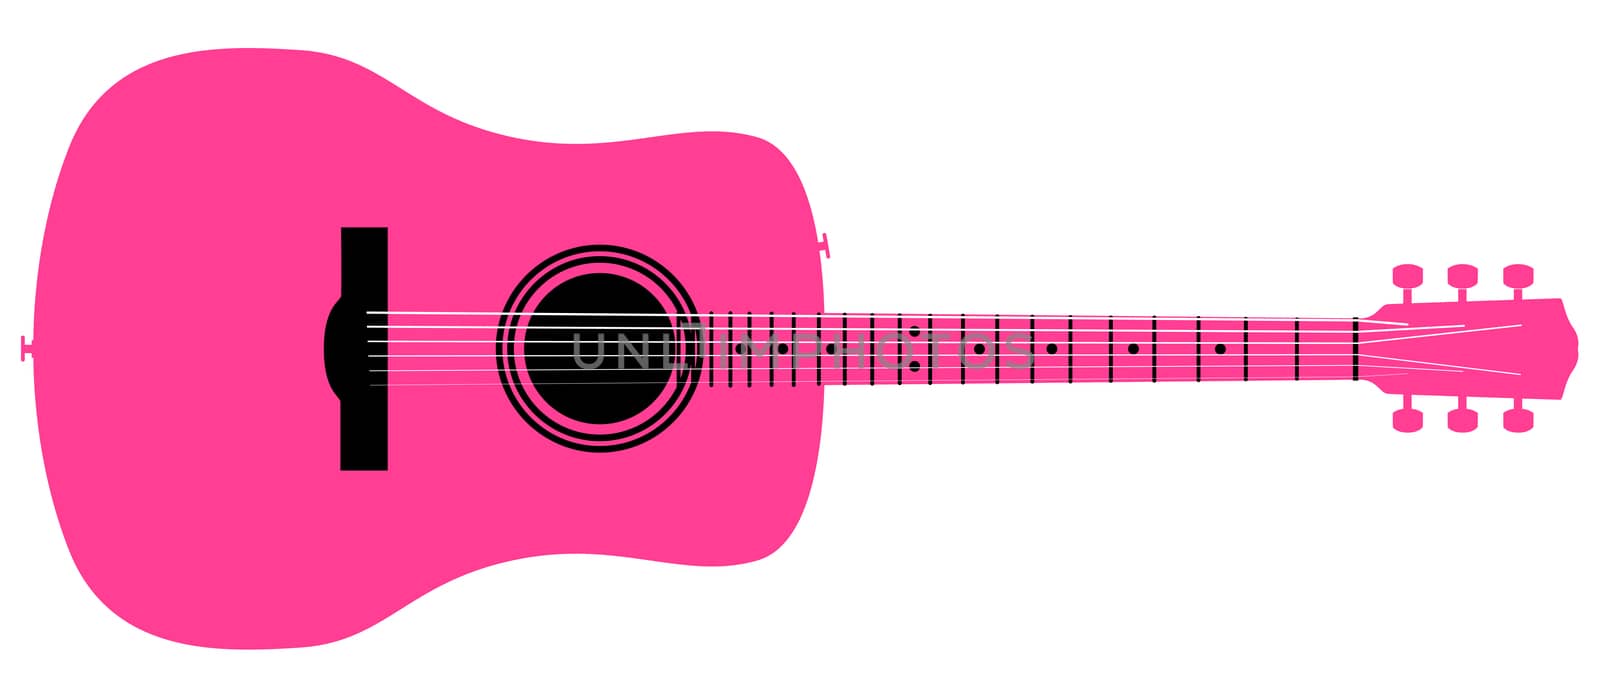 A typical acoustic guitar in pink isolated over a white background.